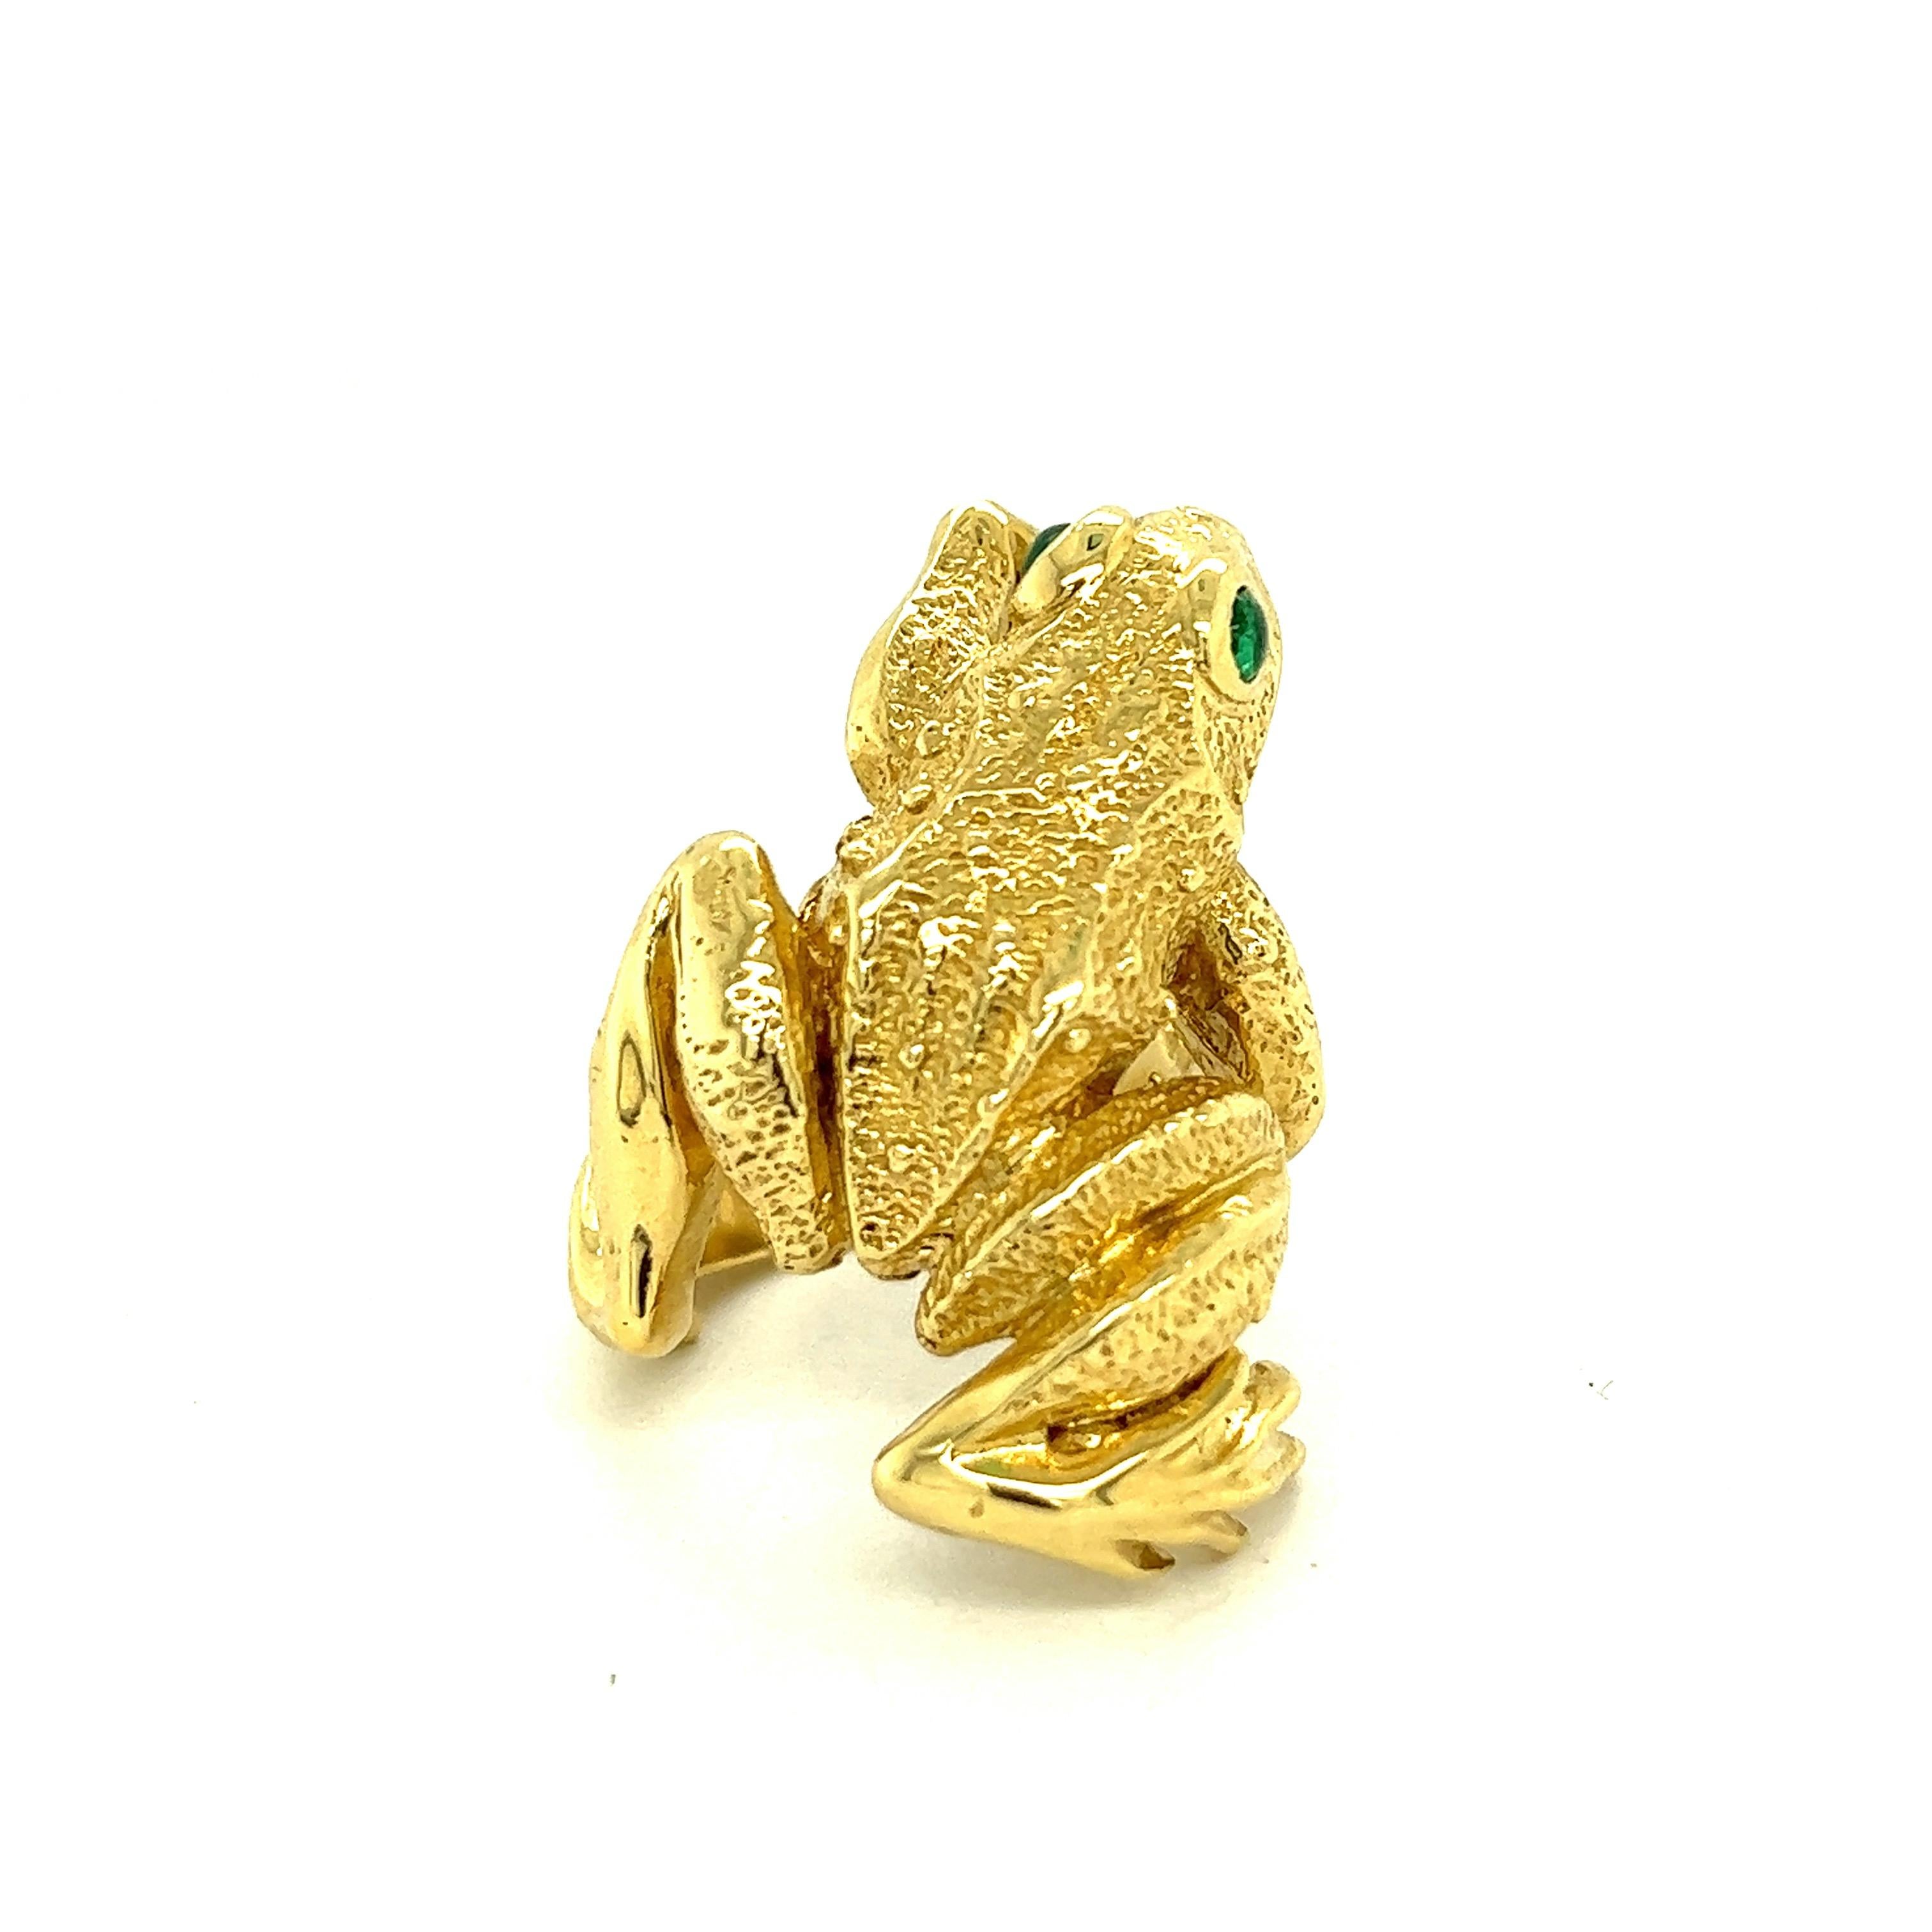 Kurt Wayne Vintage 18k Yellow Gold Large Frog Ring

Cabochon emeralds of approximately 0.16 carat total for the eyes, set on textured 18 karat yellow gold; marked KV 1969, 4623

Size: 7 US
Dimensions: width 2.5 cm, length 3.3 cm
Total weight: 27.8